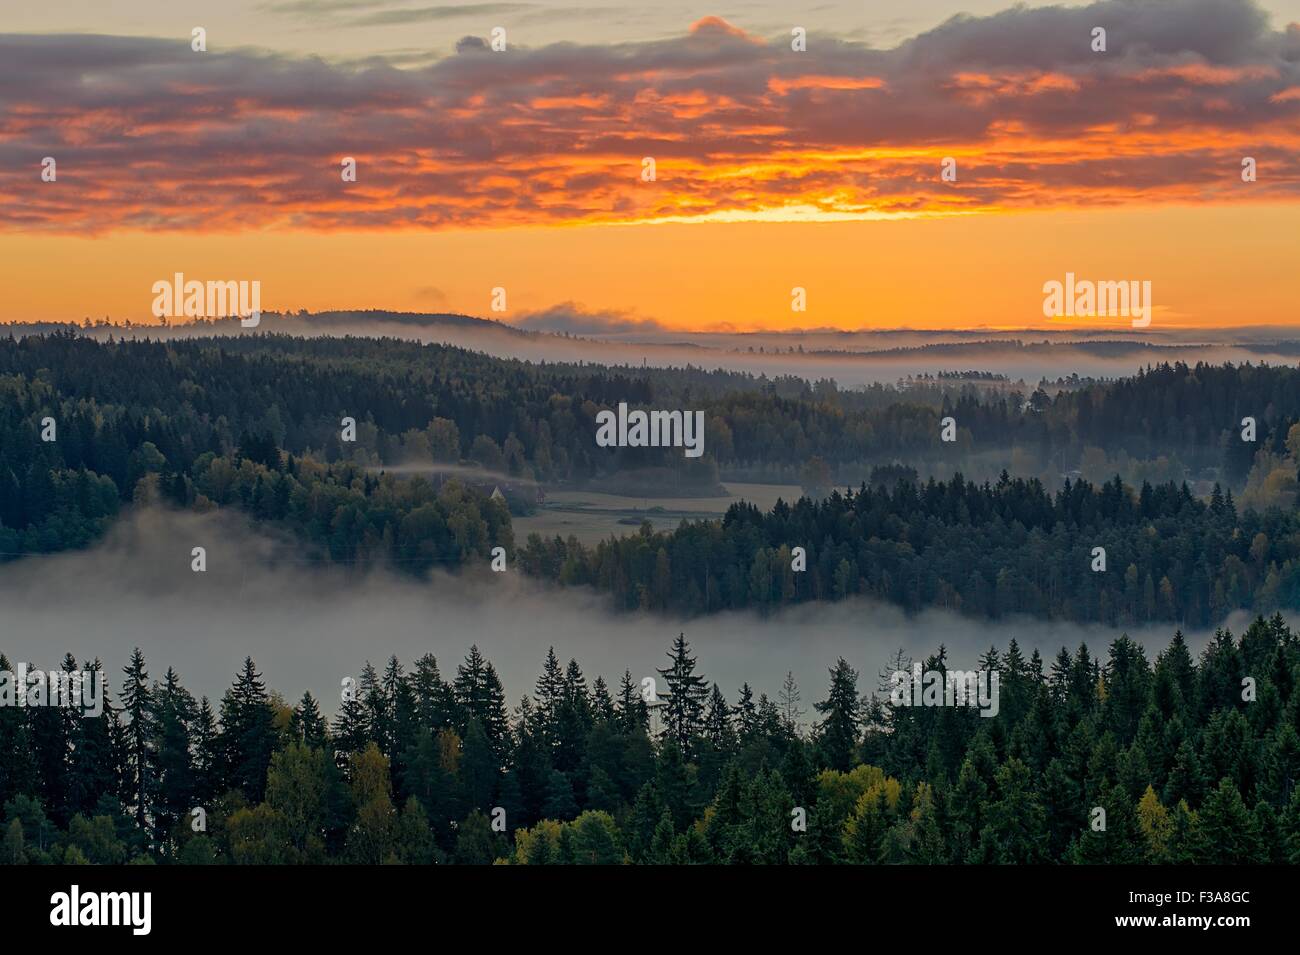 Dramatic HDR landscape of Aulanko nature reserve park in Finland. Thick fog covering the land in the early morning silence. Stock Photo